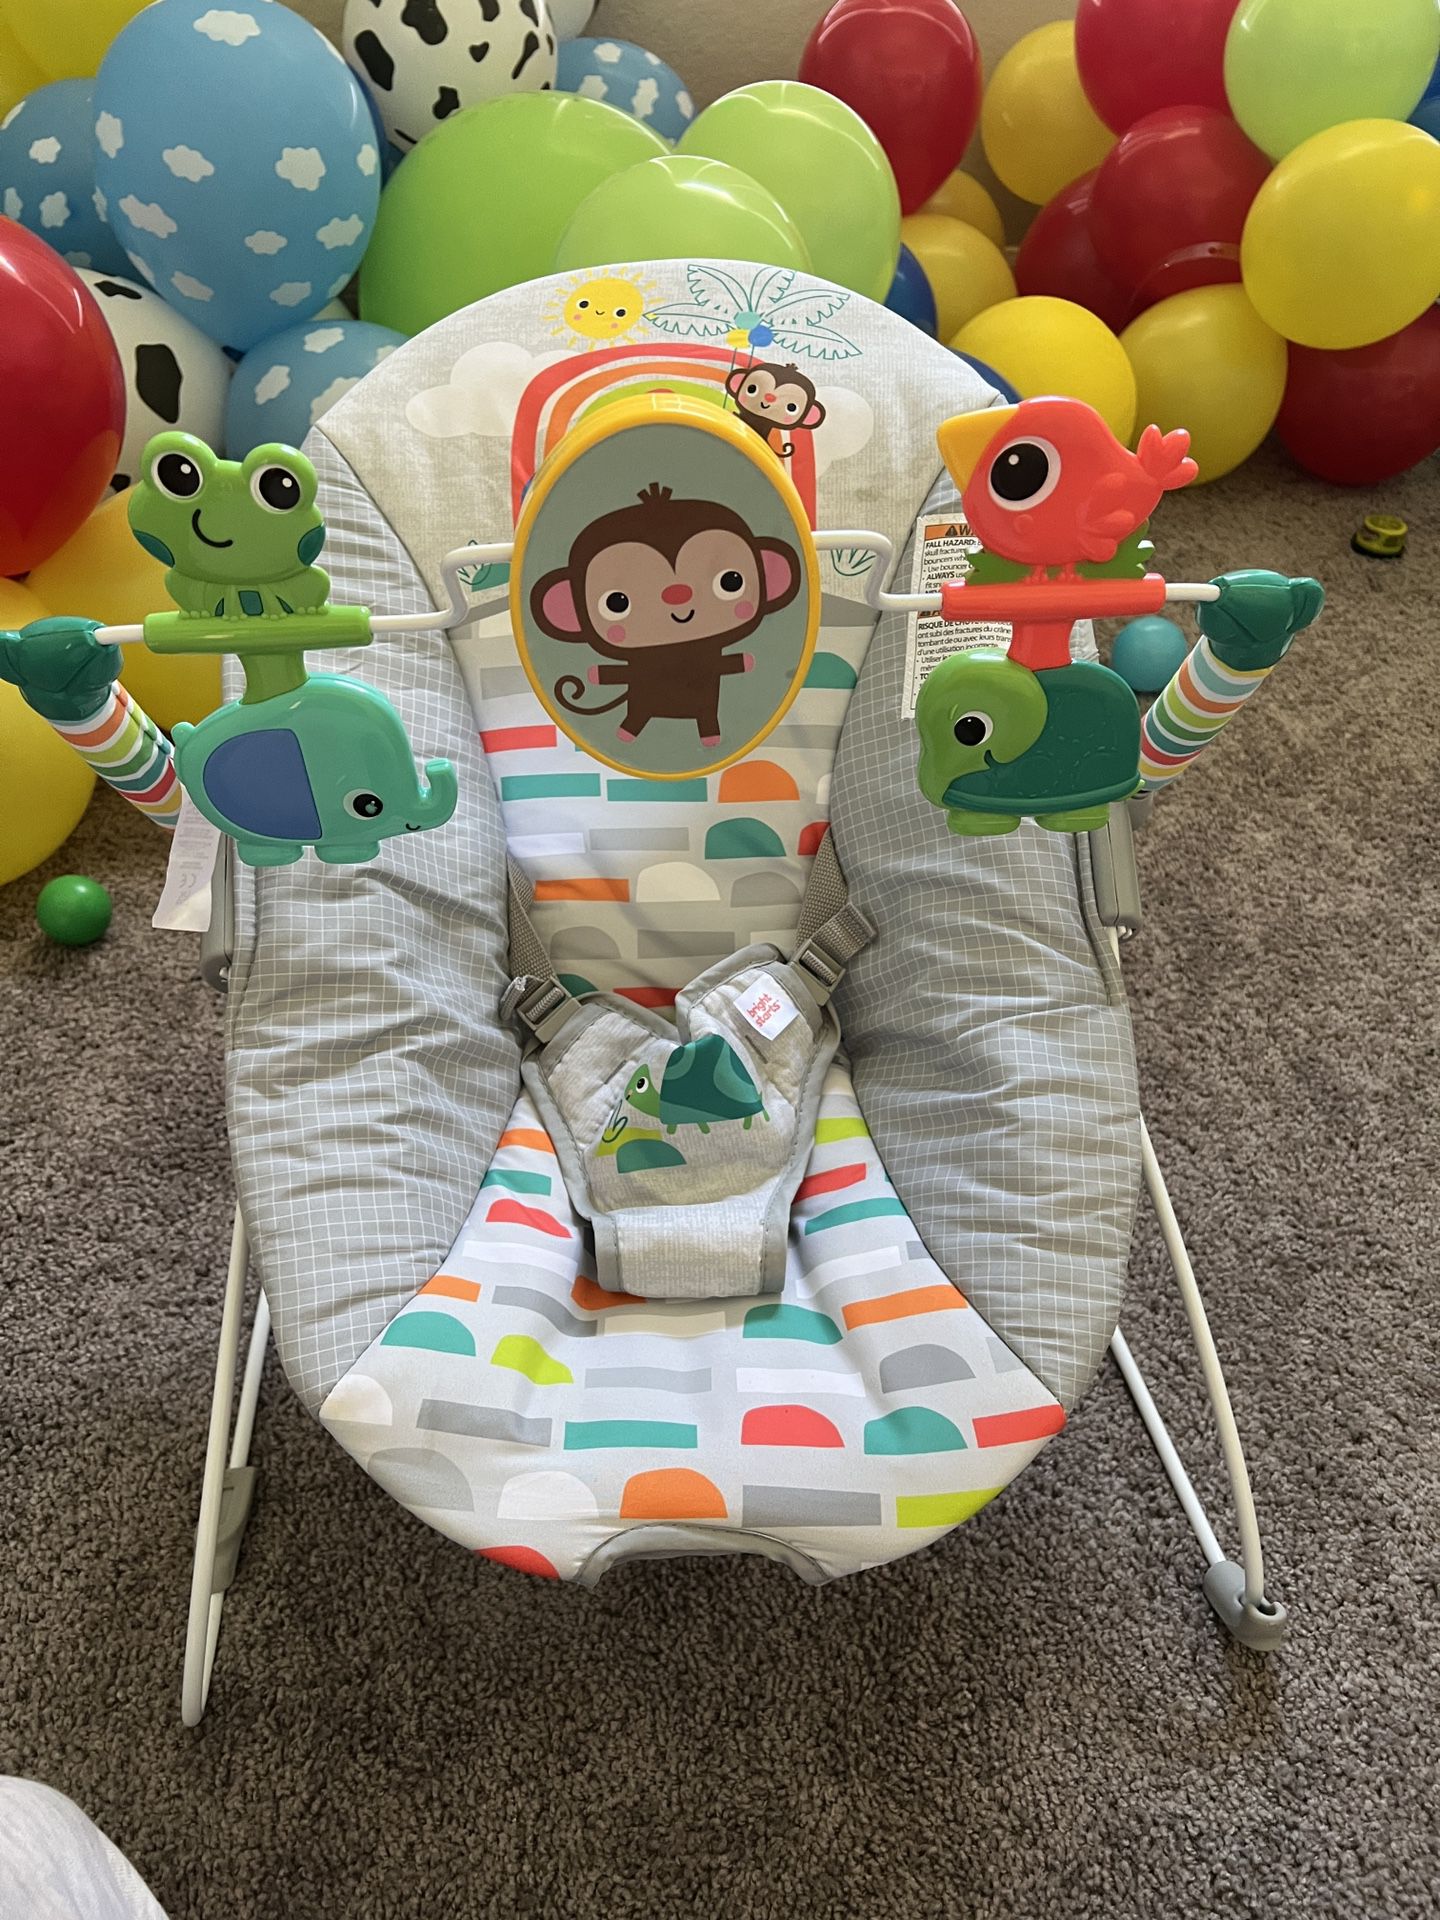 Bright Starts Playful Paradise Comfy Baby Bouncer Seat with Soothing Vibration and Toys, 